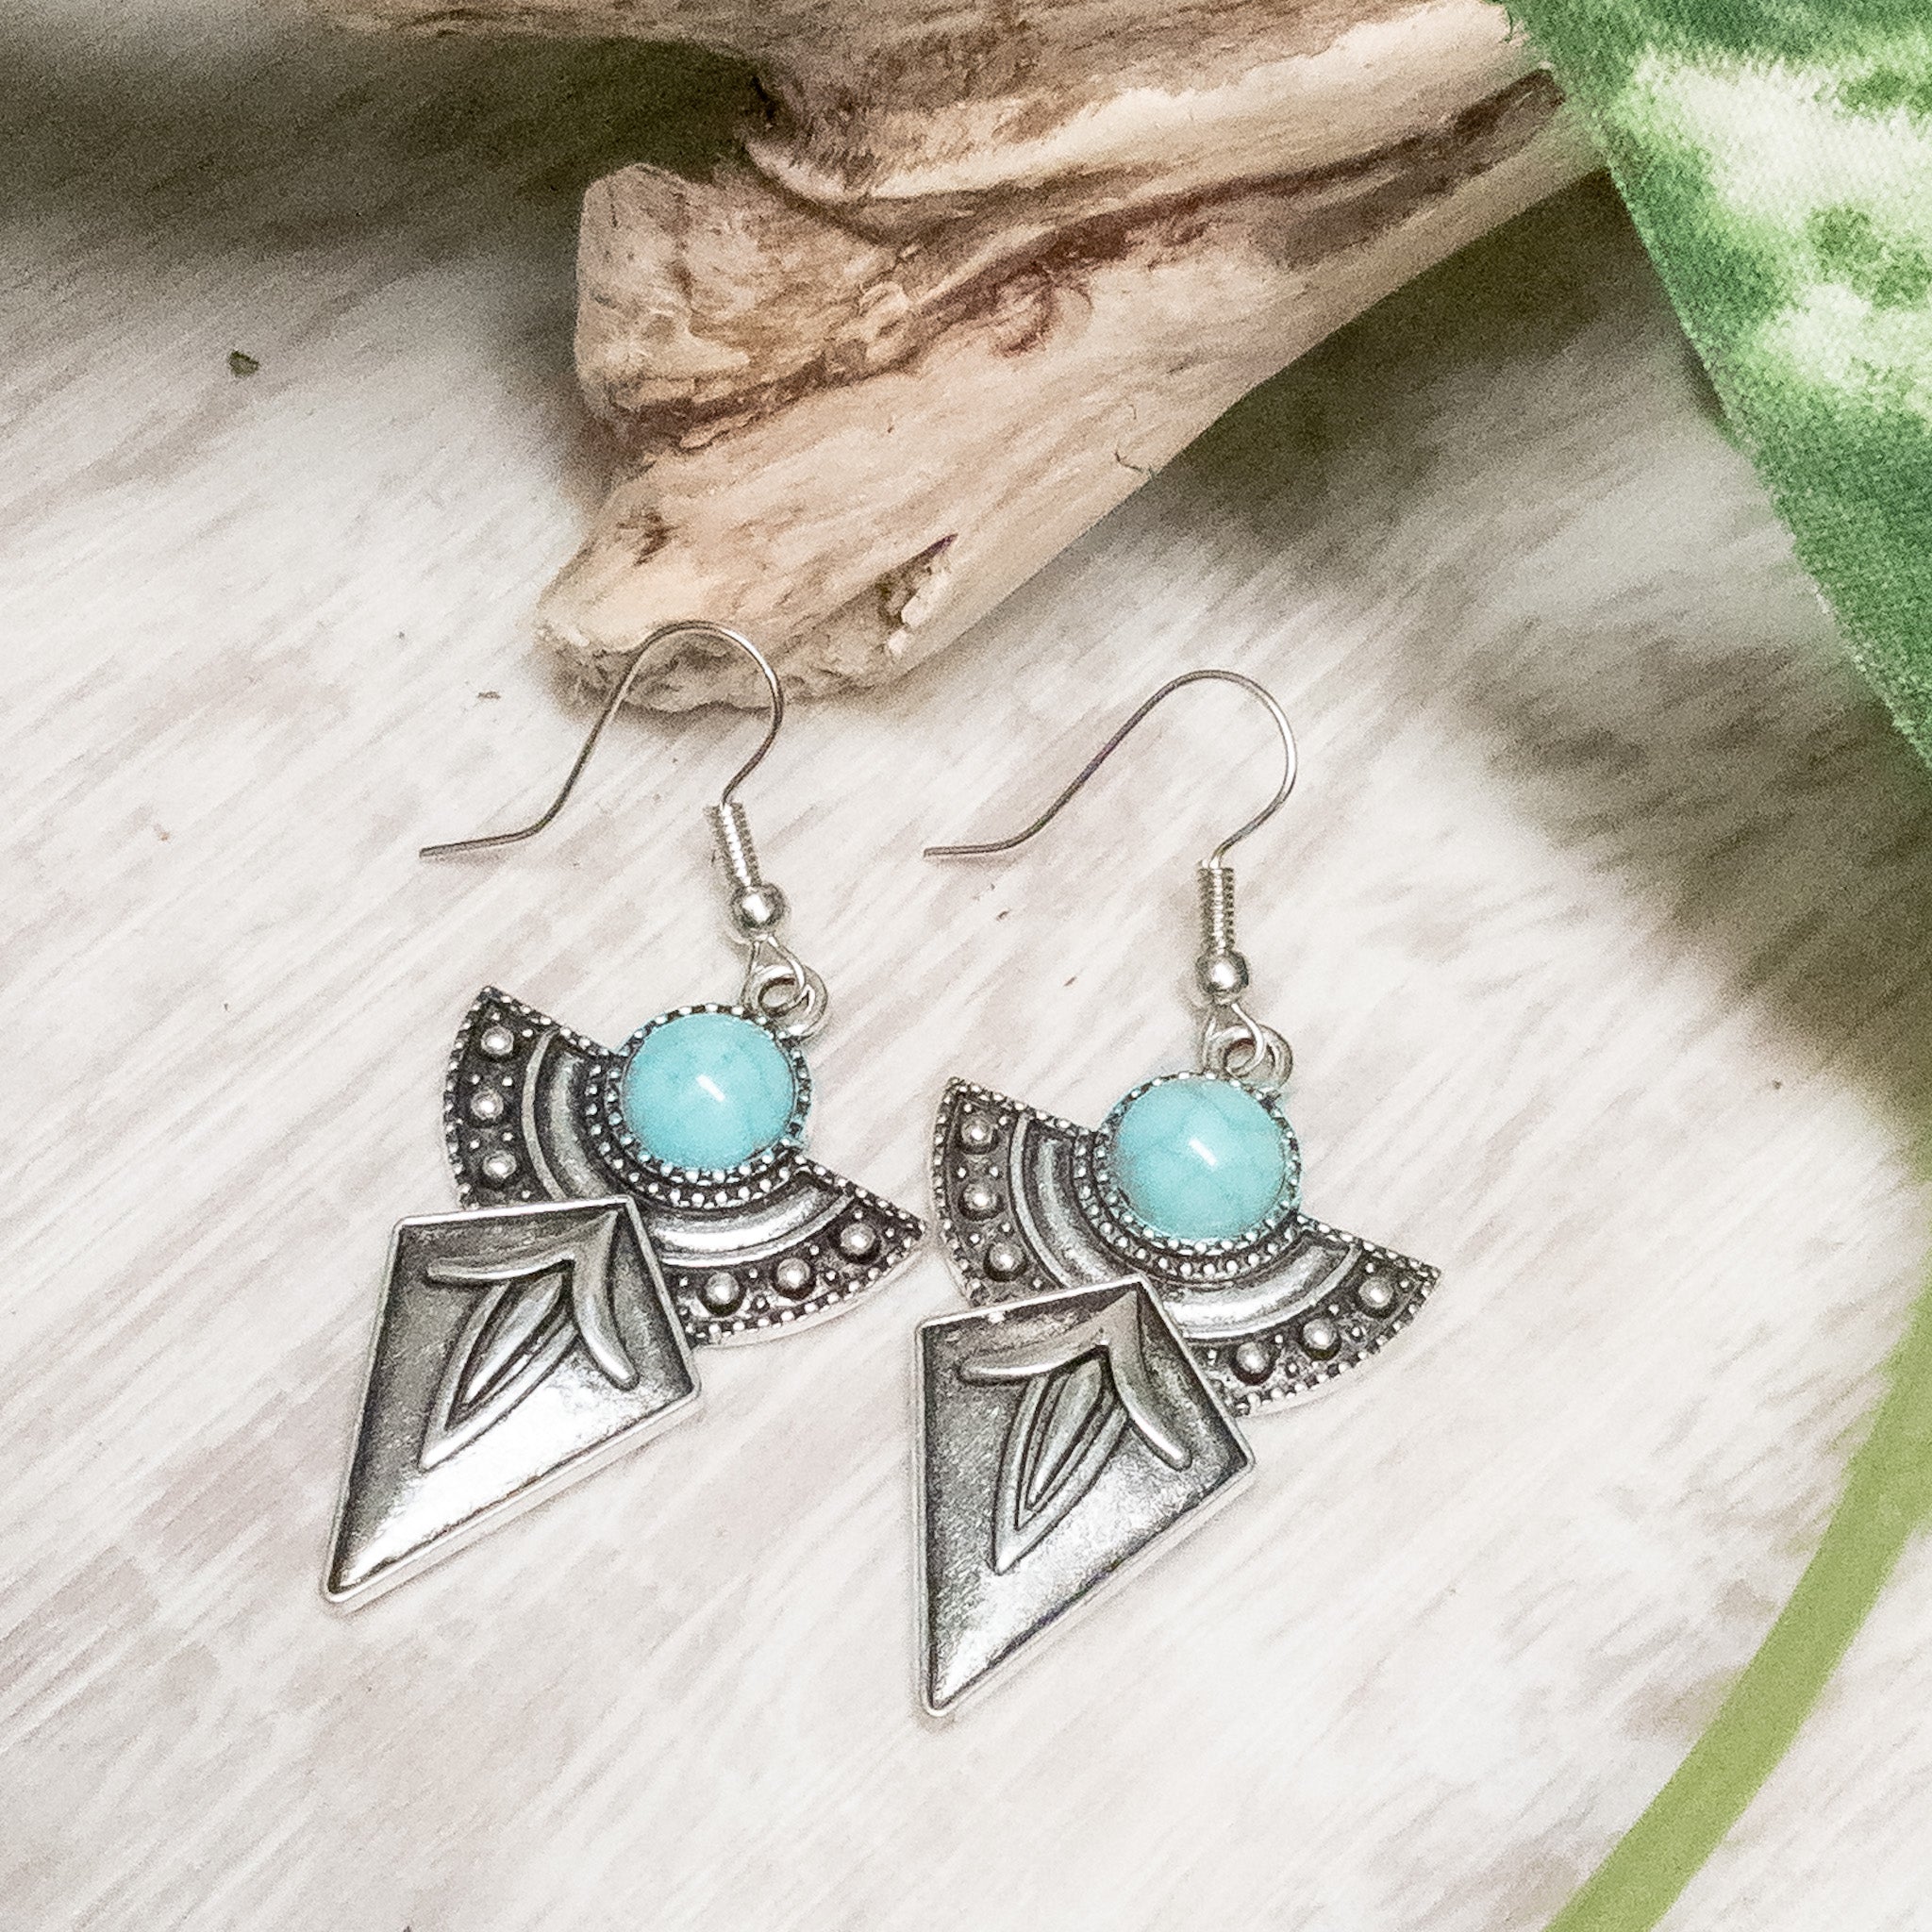 Antique Silver/Turquoise Navajo Style Shield Pendant Earrings